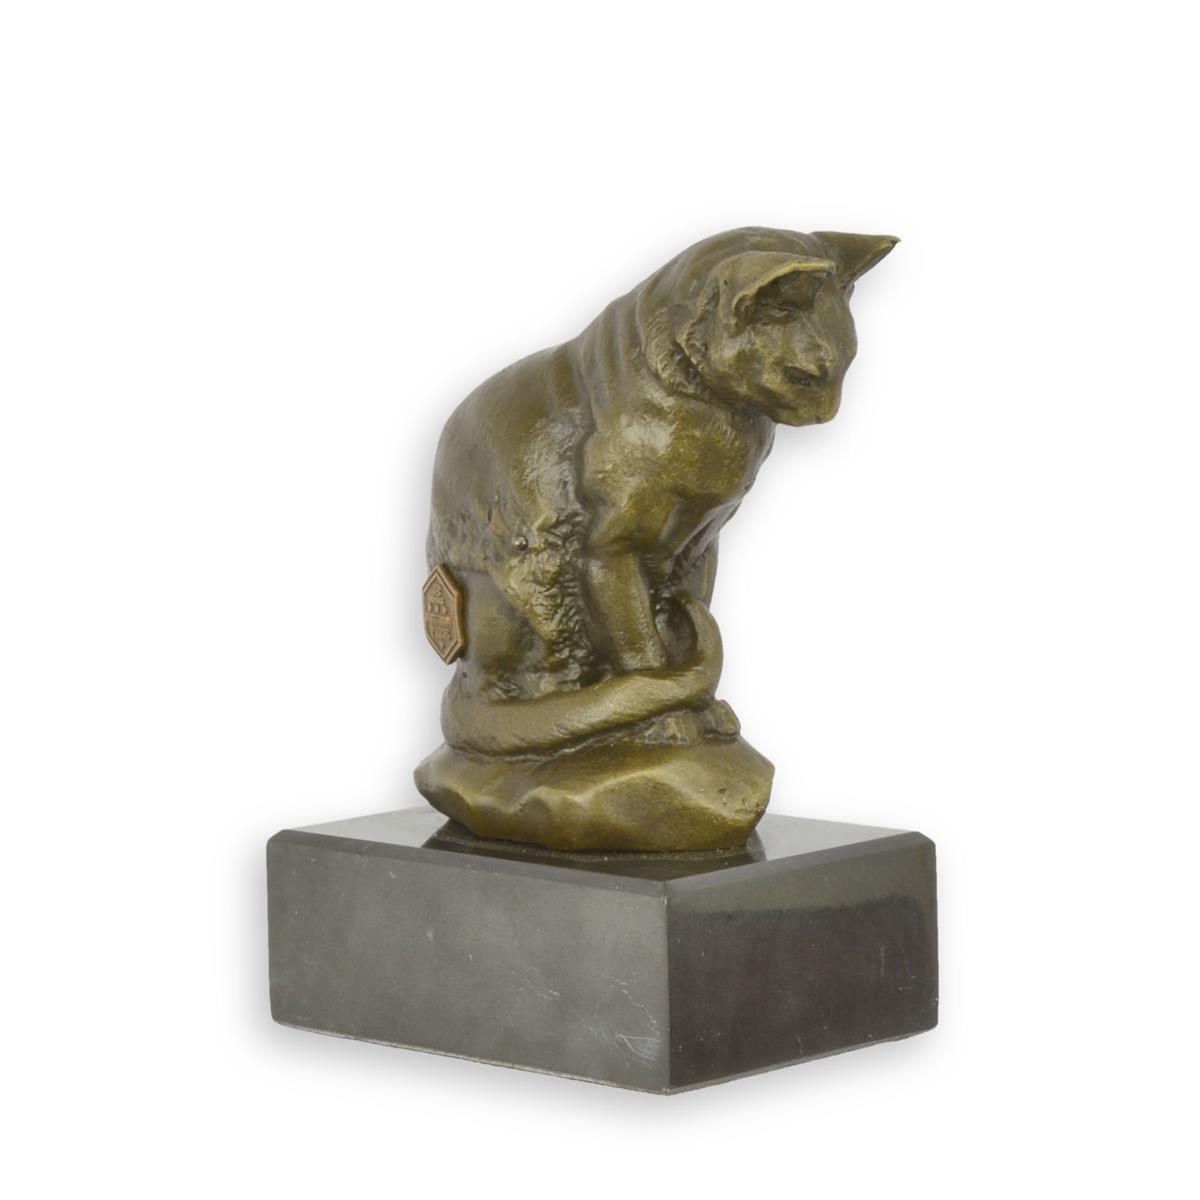 A BRONZE SCULPTURE OF A CAT LOOKING DOWN ON A MARBLE BASE